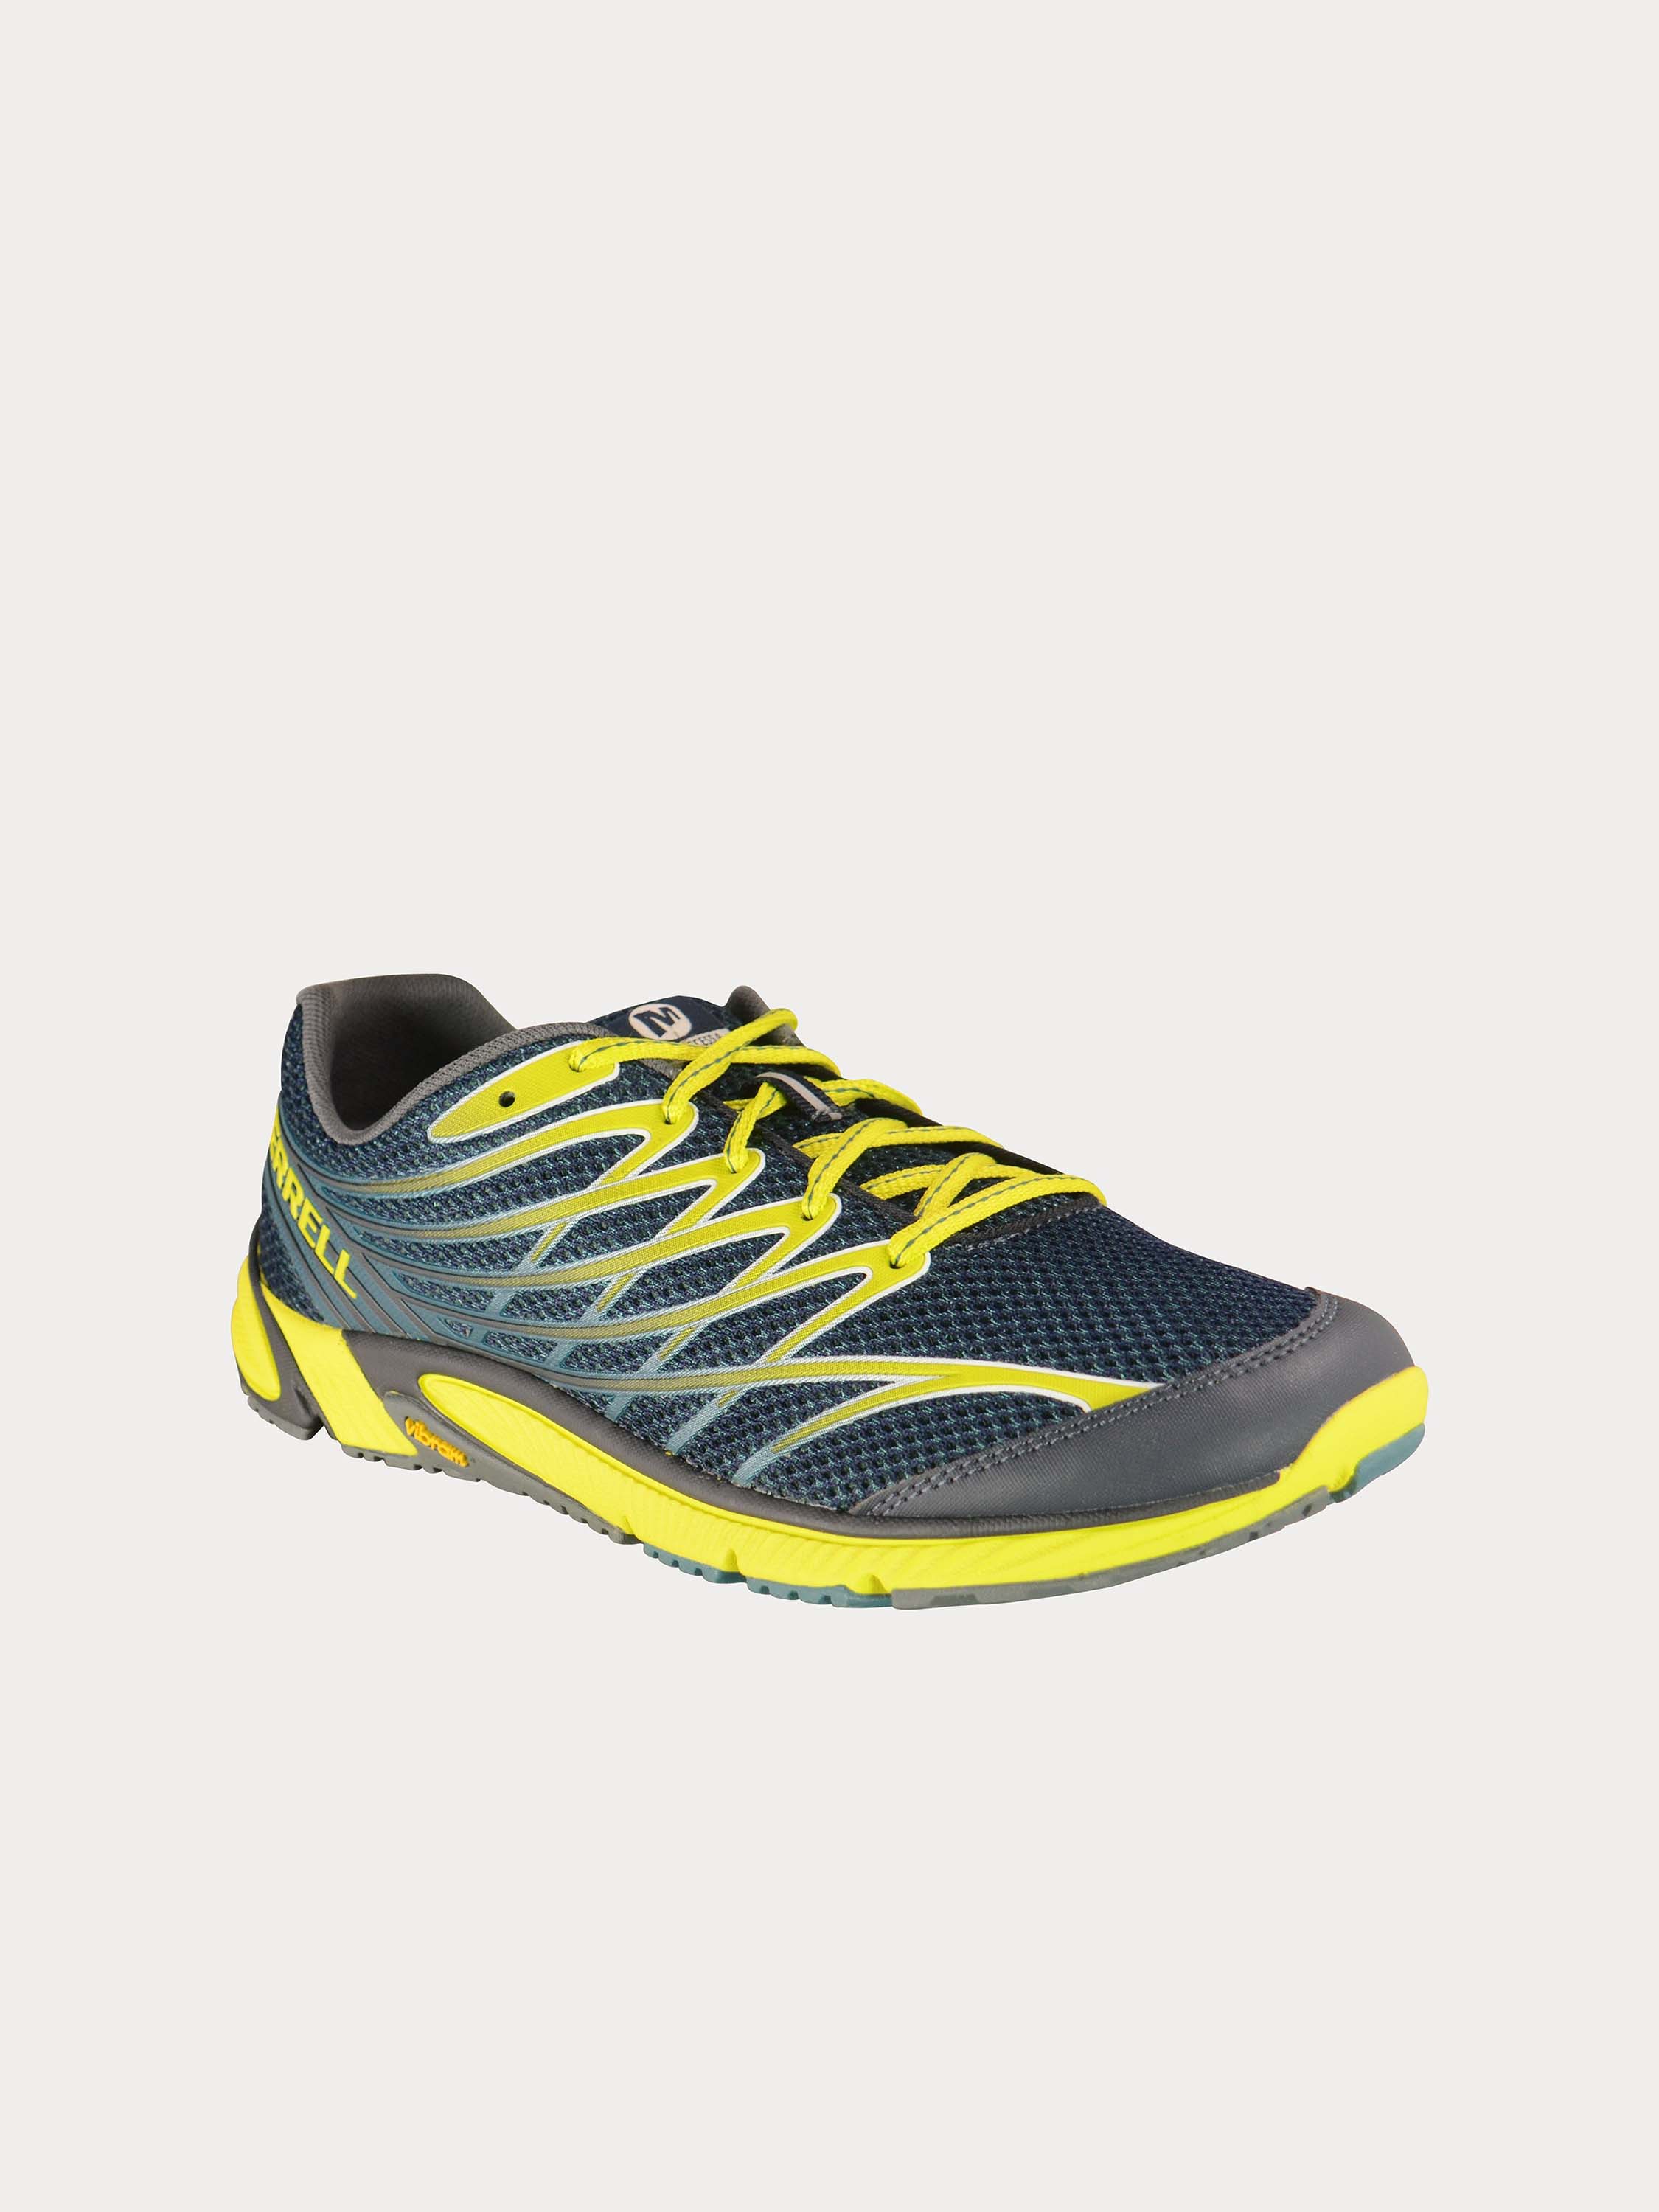 Merrell Men's Bare Access 4 Trail Running Shoes #color_Yellow